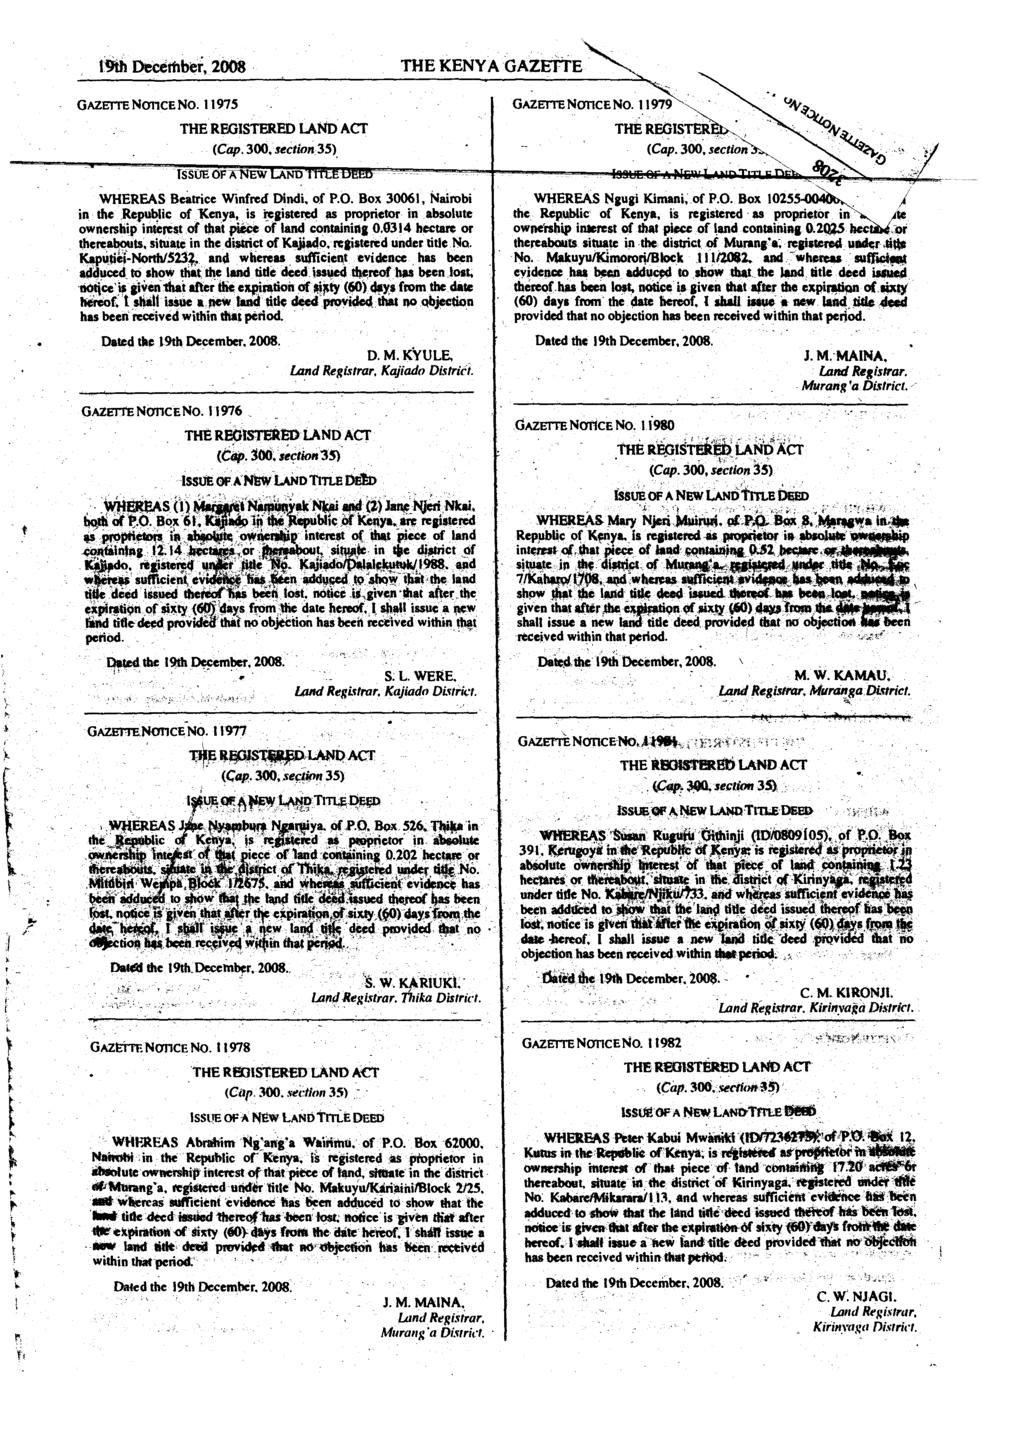 19th 1760.6thb0:, 2008 THE KENYA GAZETTE - GAZETTE NOTICE NO. 11975 (Cap. 300, section 35). ISSUE OF KNEW WHEREAS Beitrice Winfred Dindi. of P.O. Box 30061, Nairobi in the Republic of Kenya, is registered as proprietor in absolute ownership interest of that piece of land containing 0.